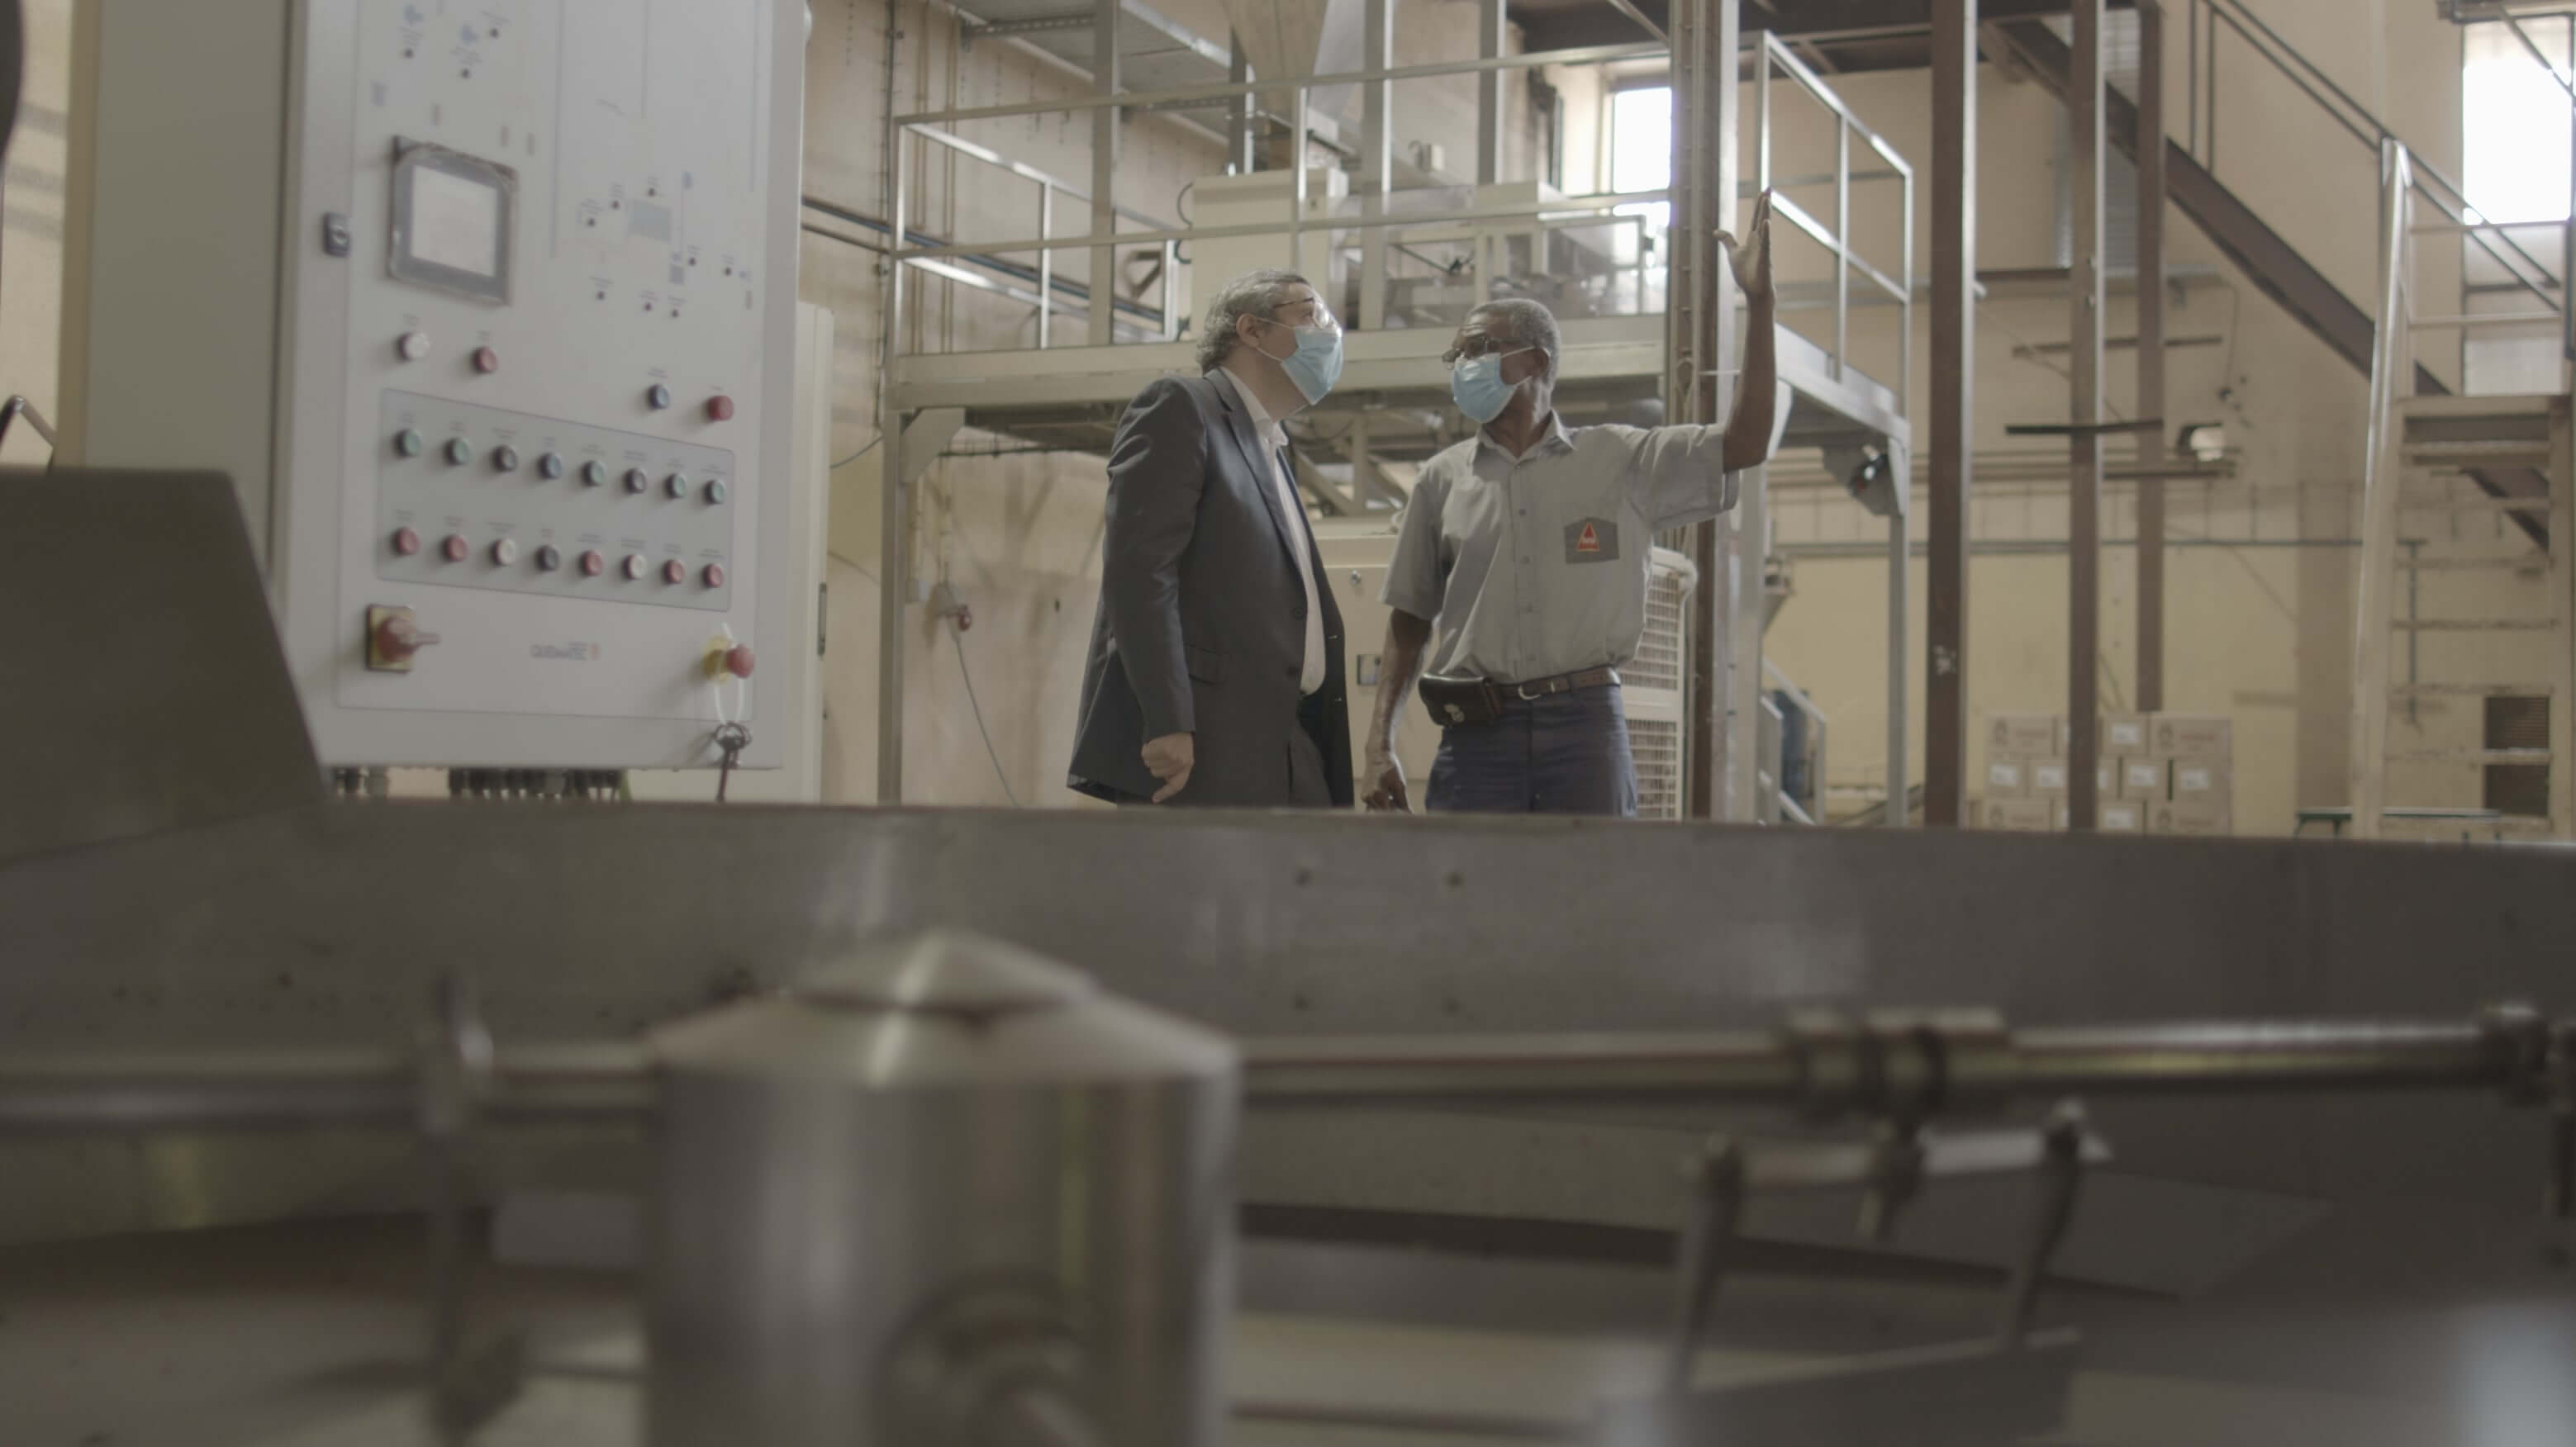 shot of two people in a manufacturing facility